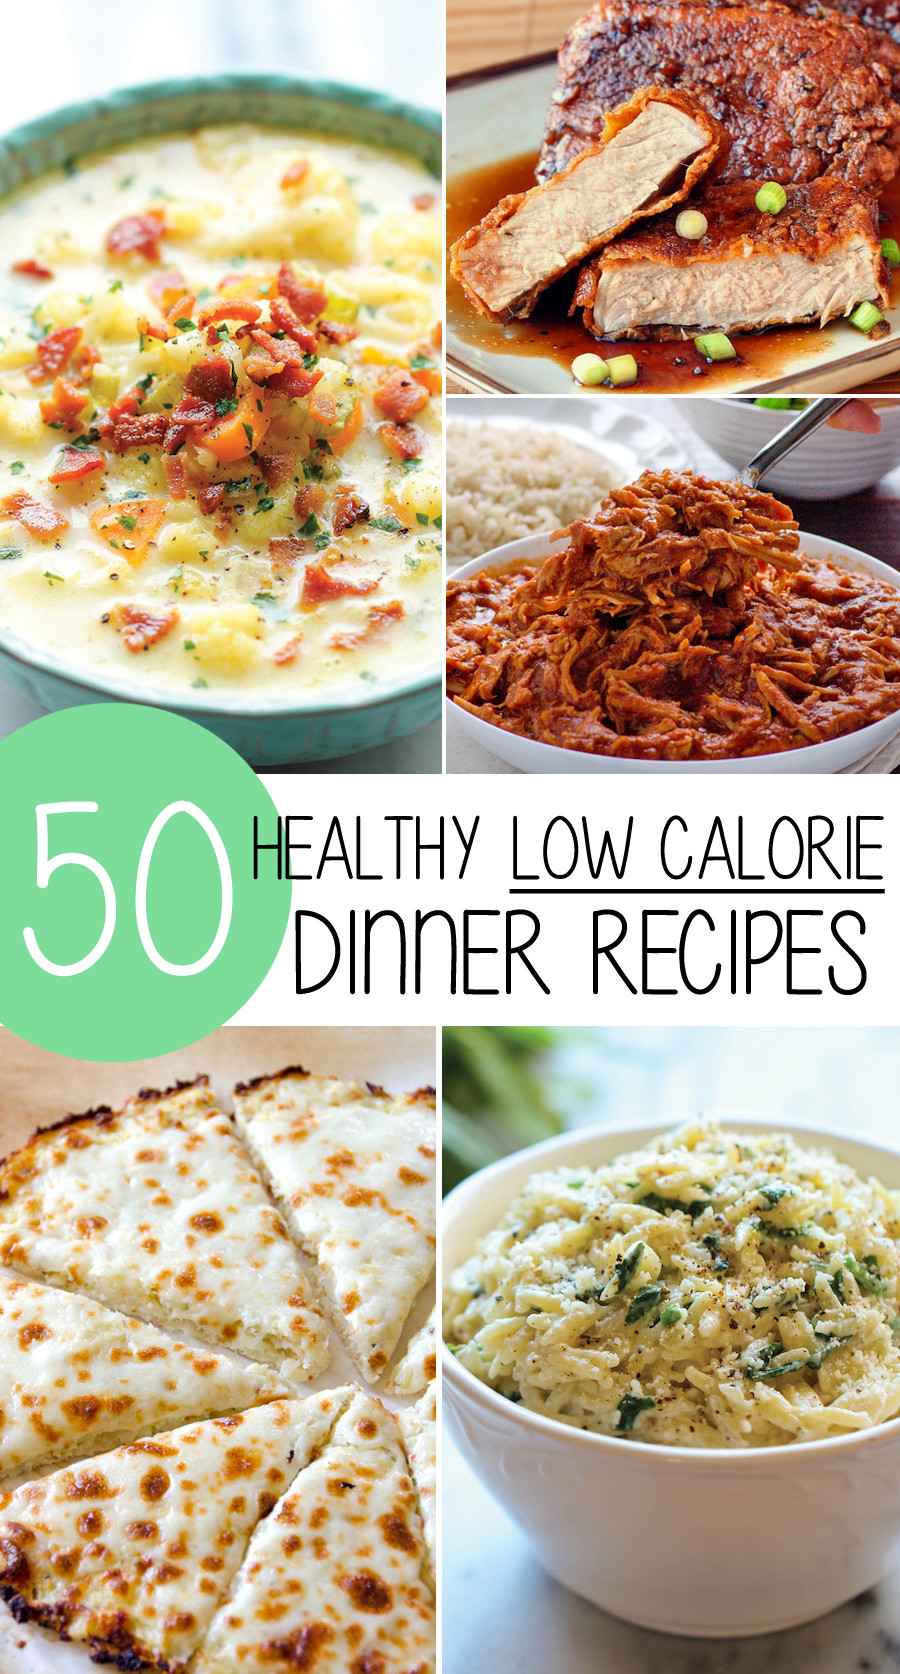 Low Calorie Recipes For Weight Loss
 50 Healthy Low Calorie Weight Loss Dinner Recipes